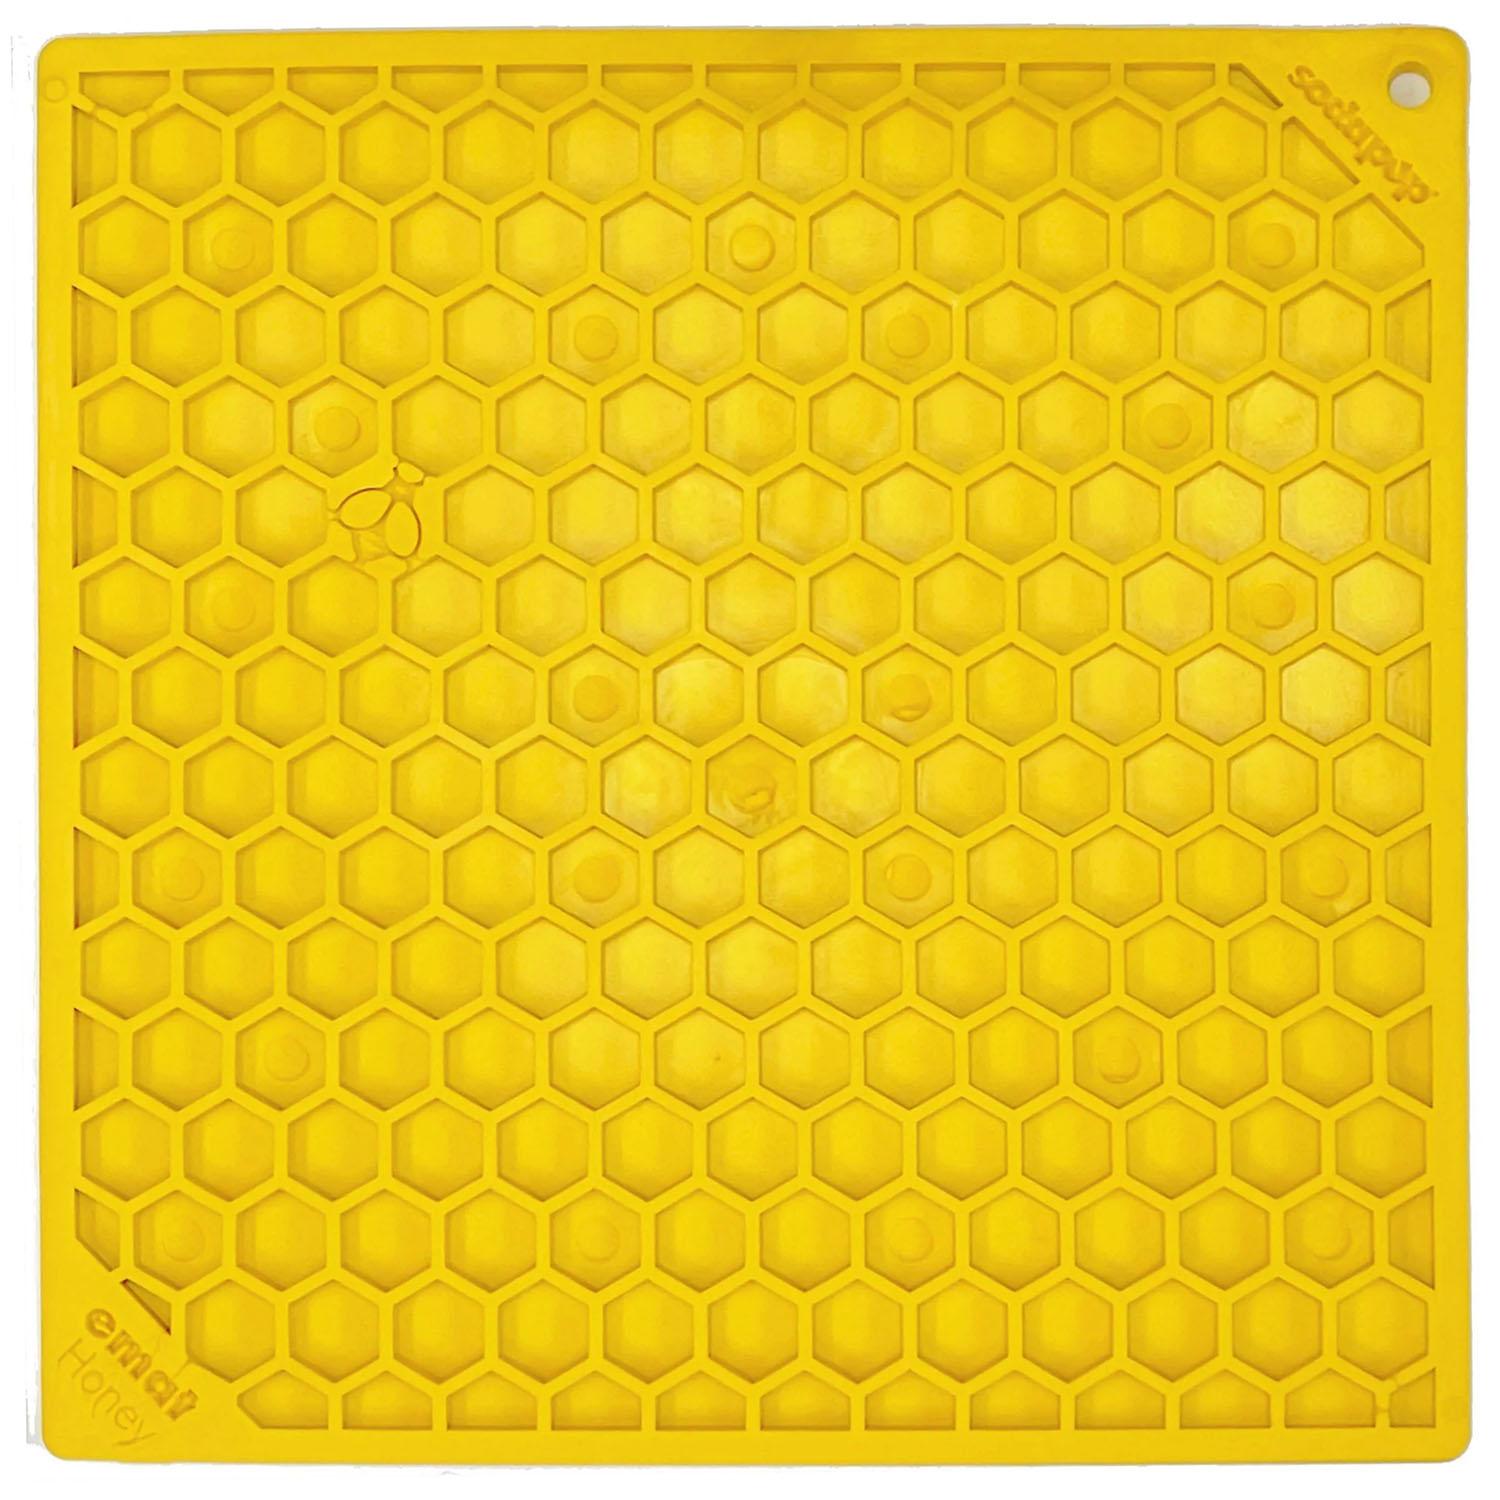 https://images.baxterboo.com/global/images/products/large/sodapup-honeycomb-enrichment-licking-dog-mat-yellow-5791.jpg